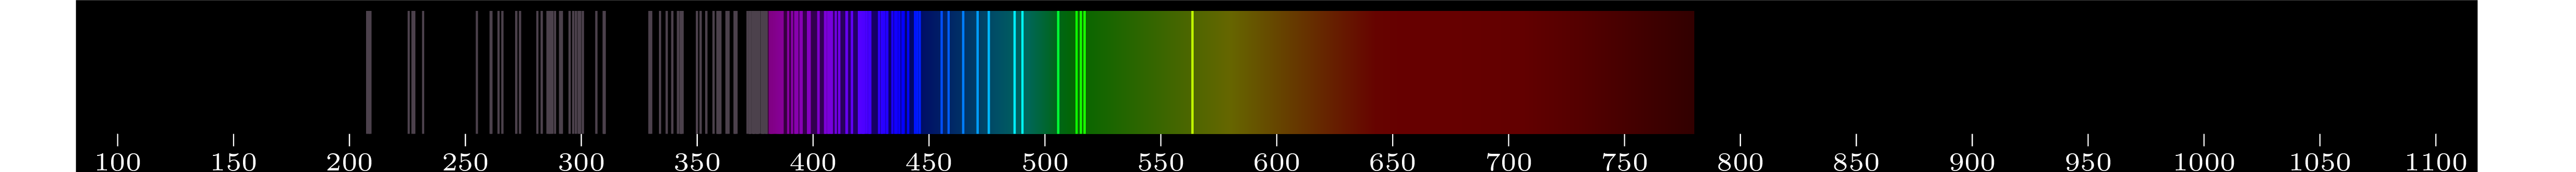 emmision spectra of element Ru